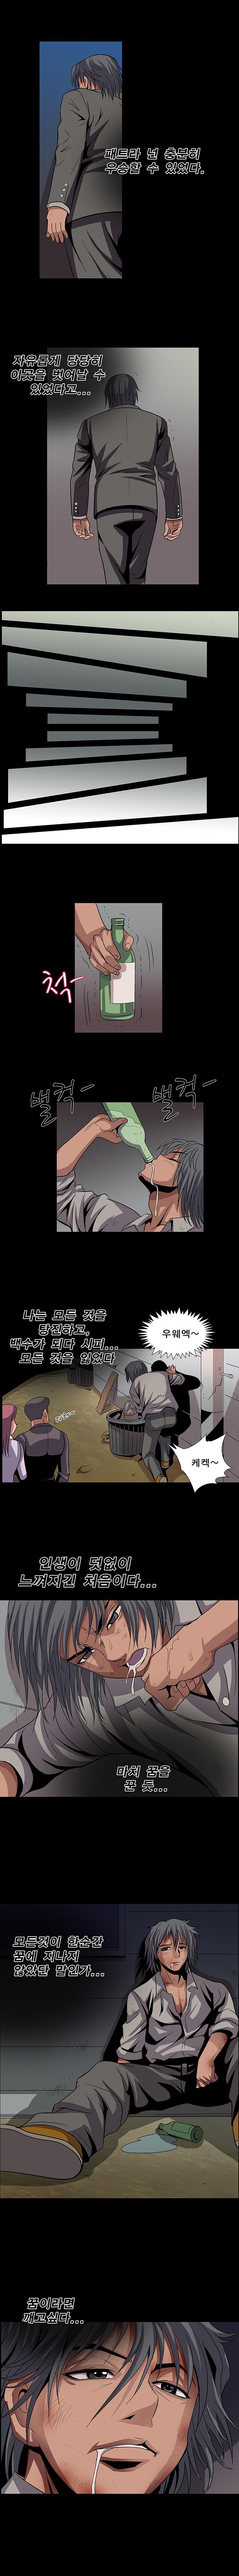 BJ Kidnapping Case Raw - Chapter 25 Page 3